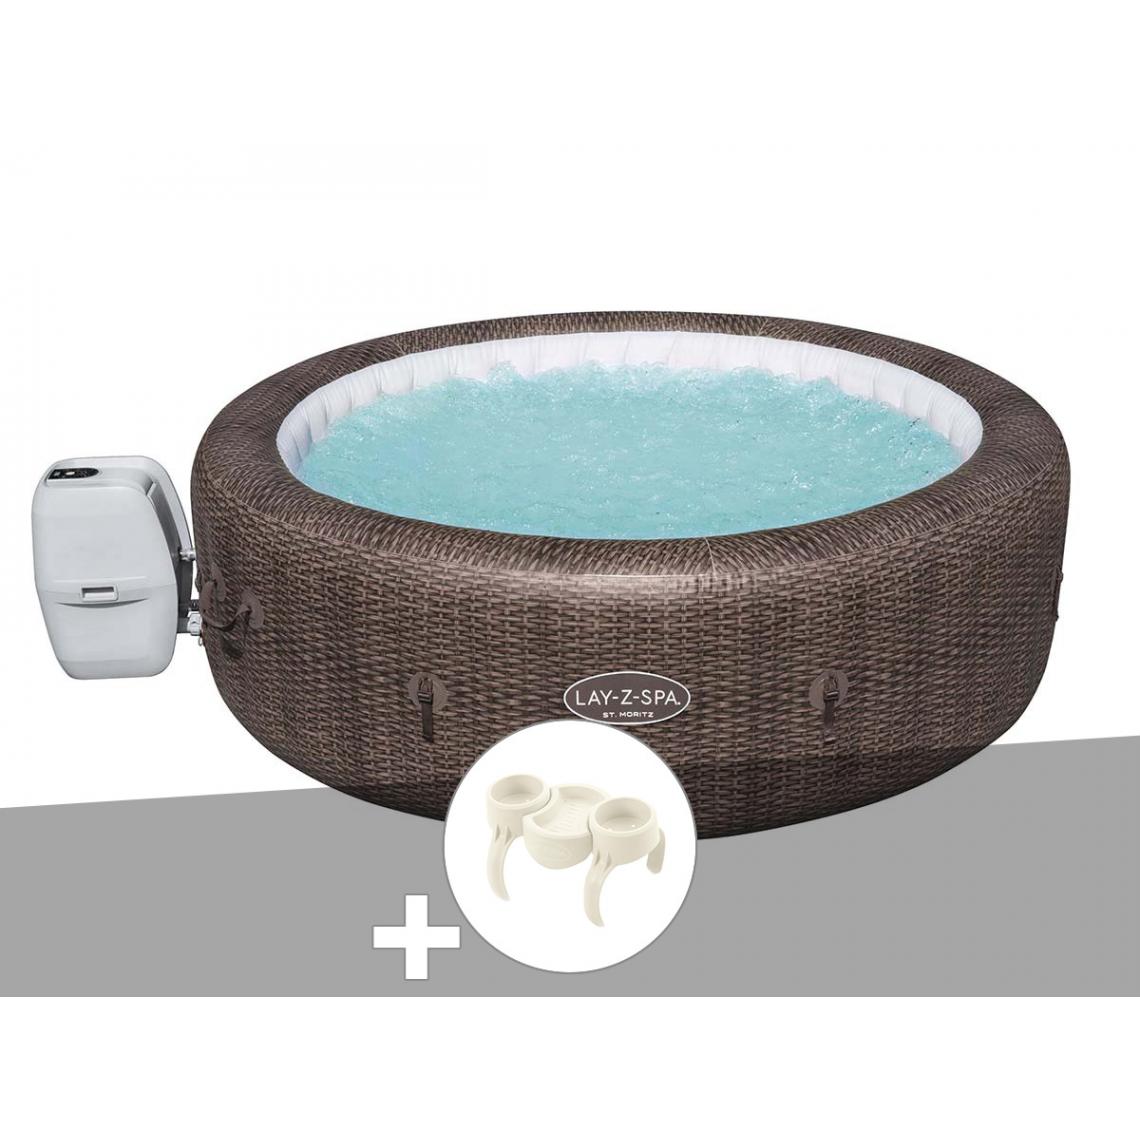 Bestway - Kit spa gonflable Bestway Lay-Z-Spa St Moritz rond Airjet 5/7 places + Porte-gobelets - Spa gonflable